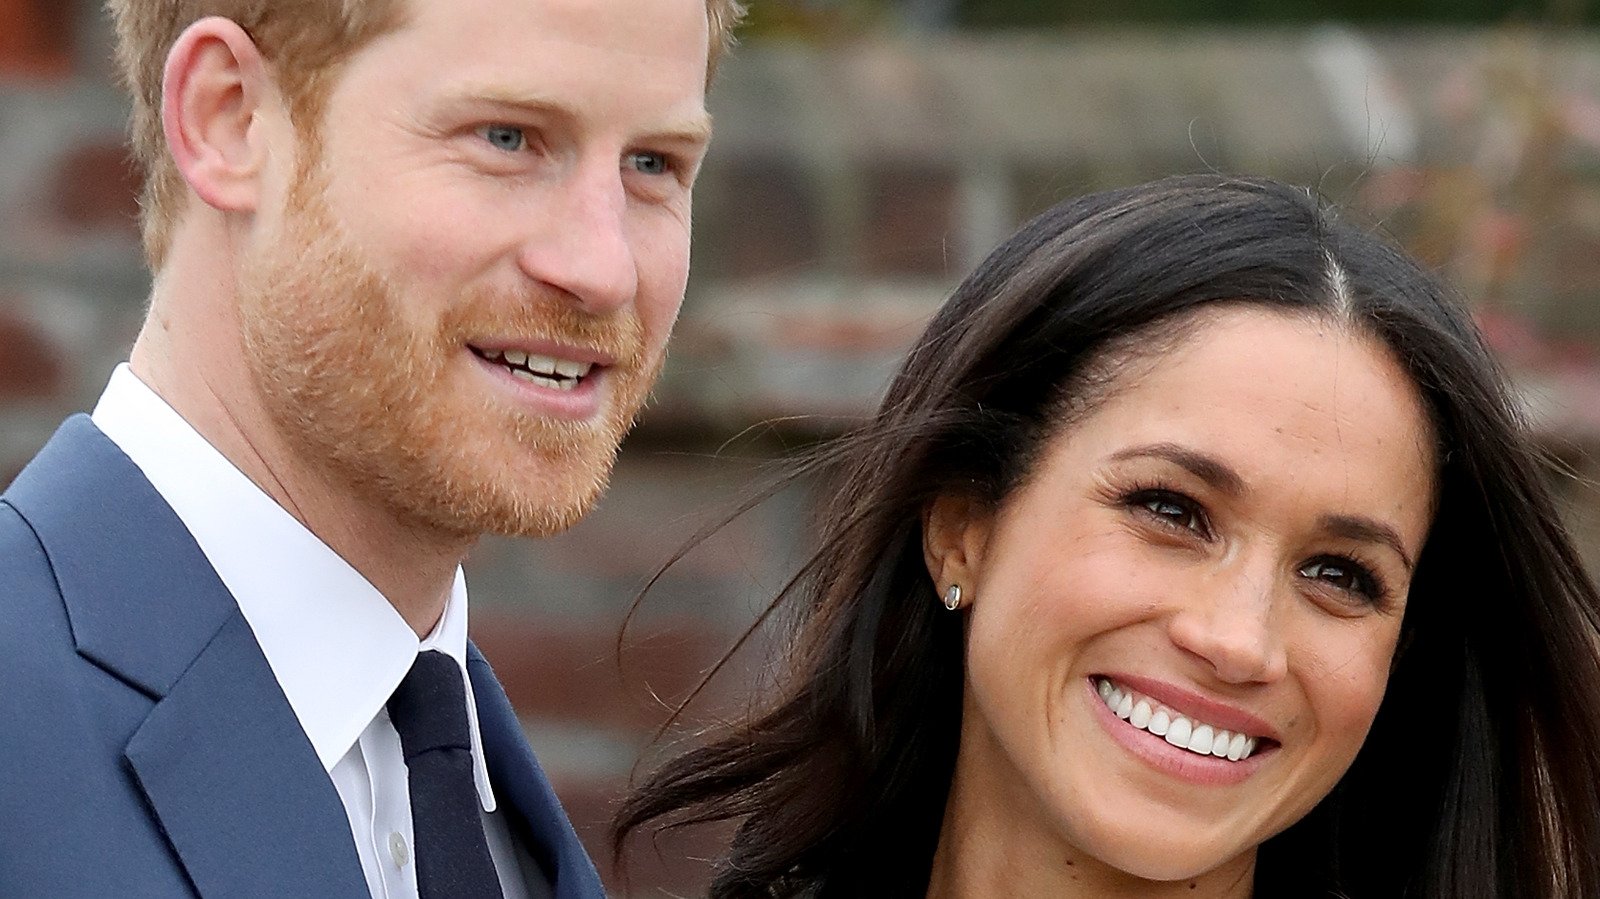 The One Word Meghan Markle Wouldn't Use To Describe Her Relationship With Prince Harry